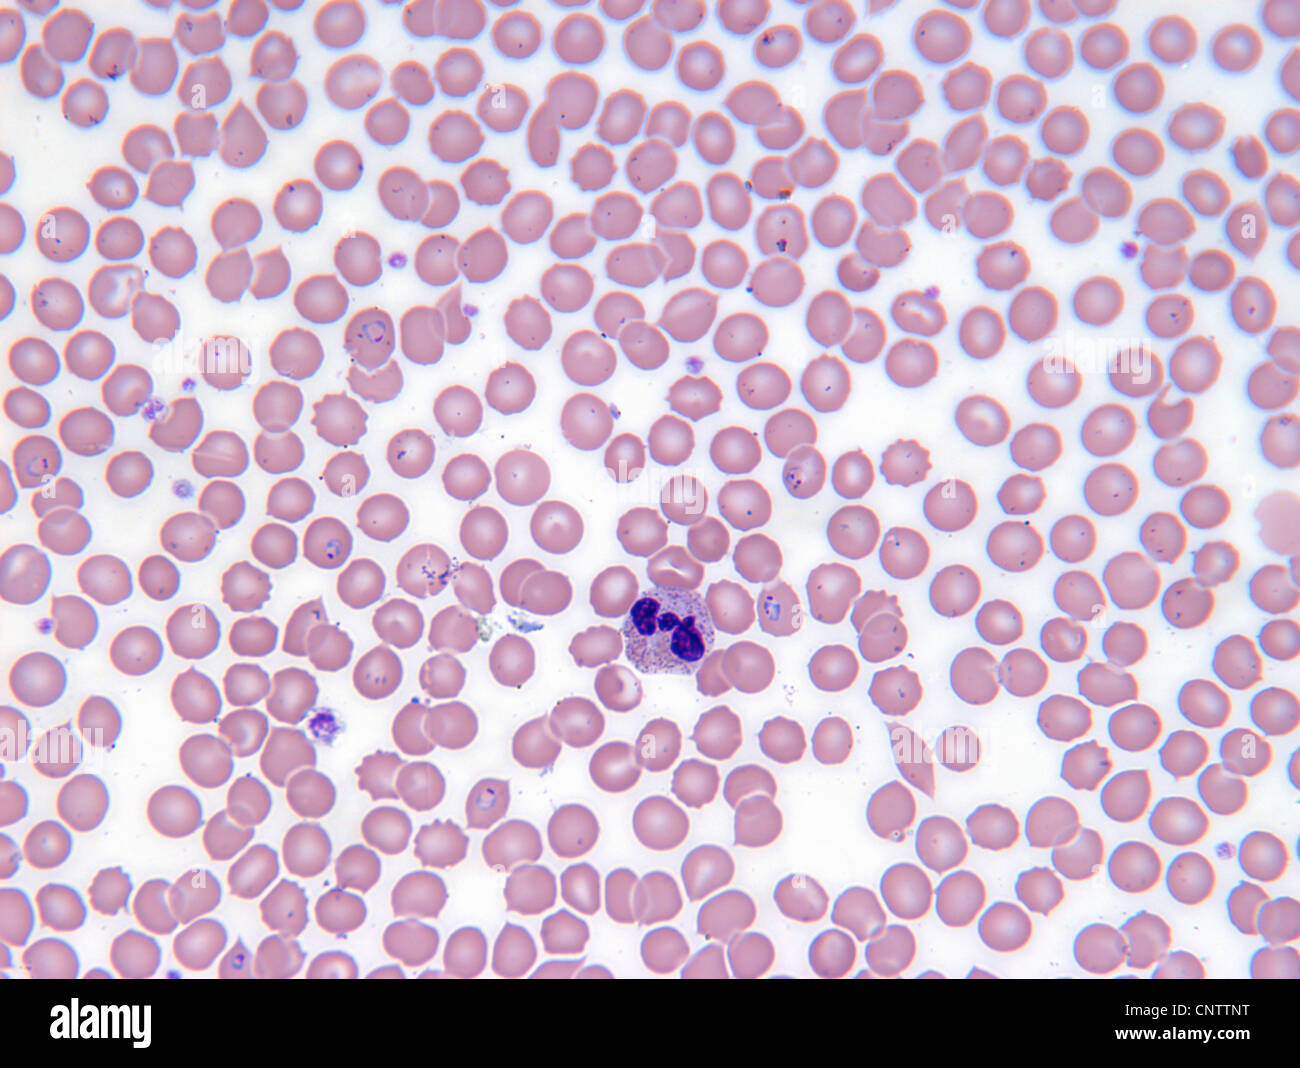 Malarial blood cells Stock Photo